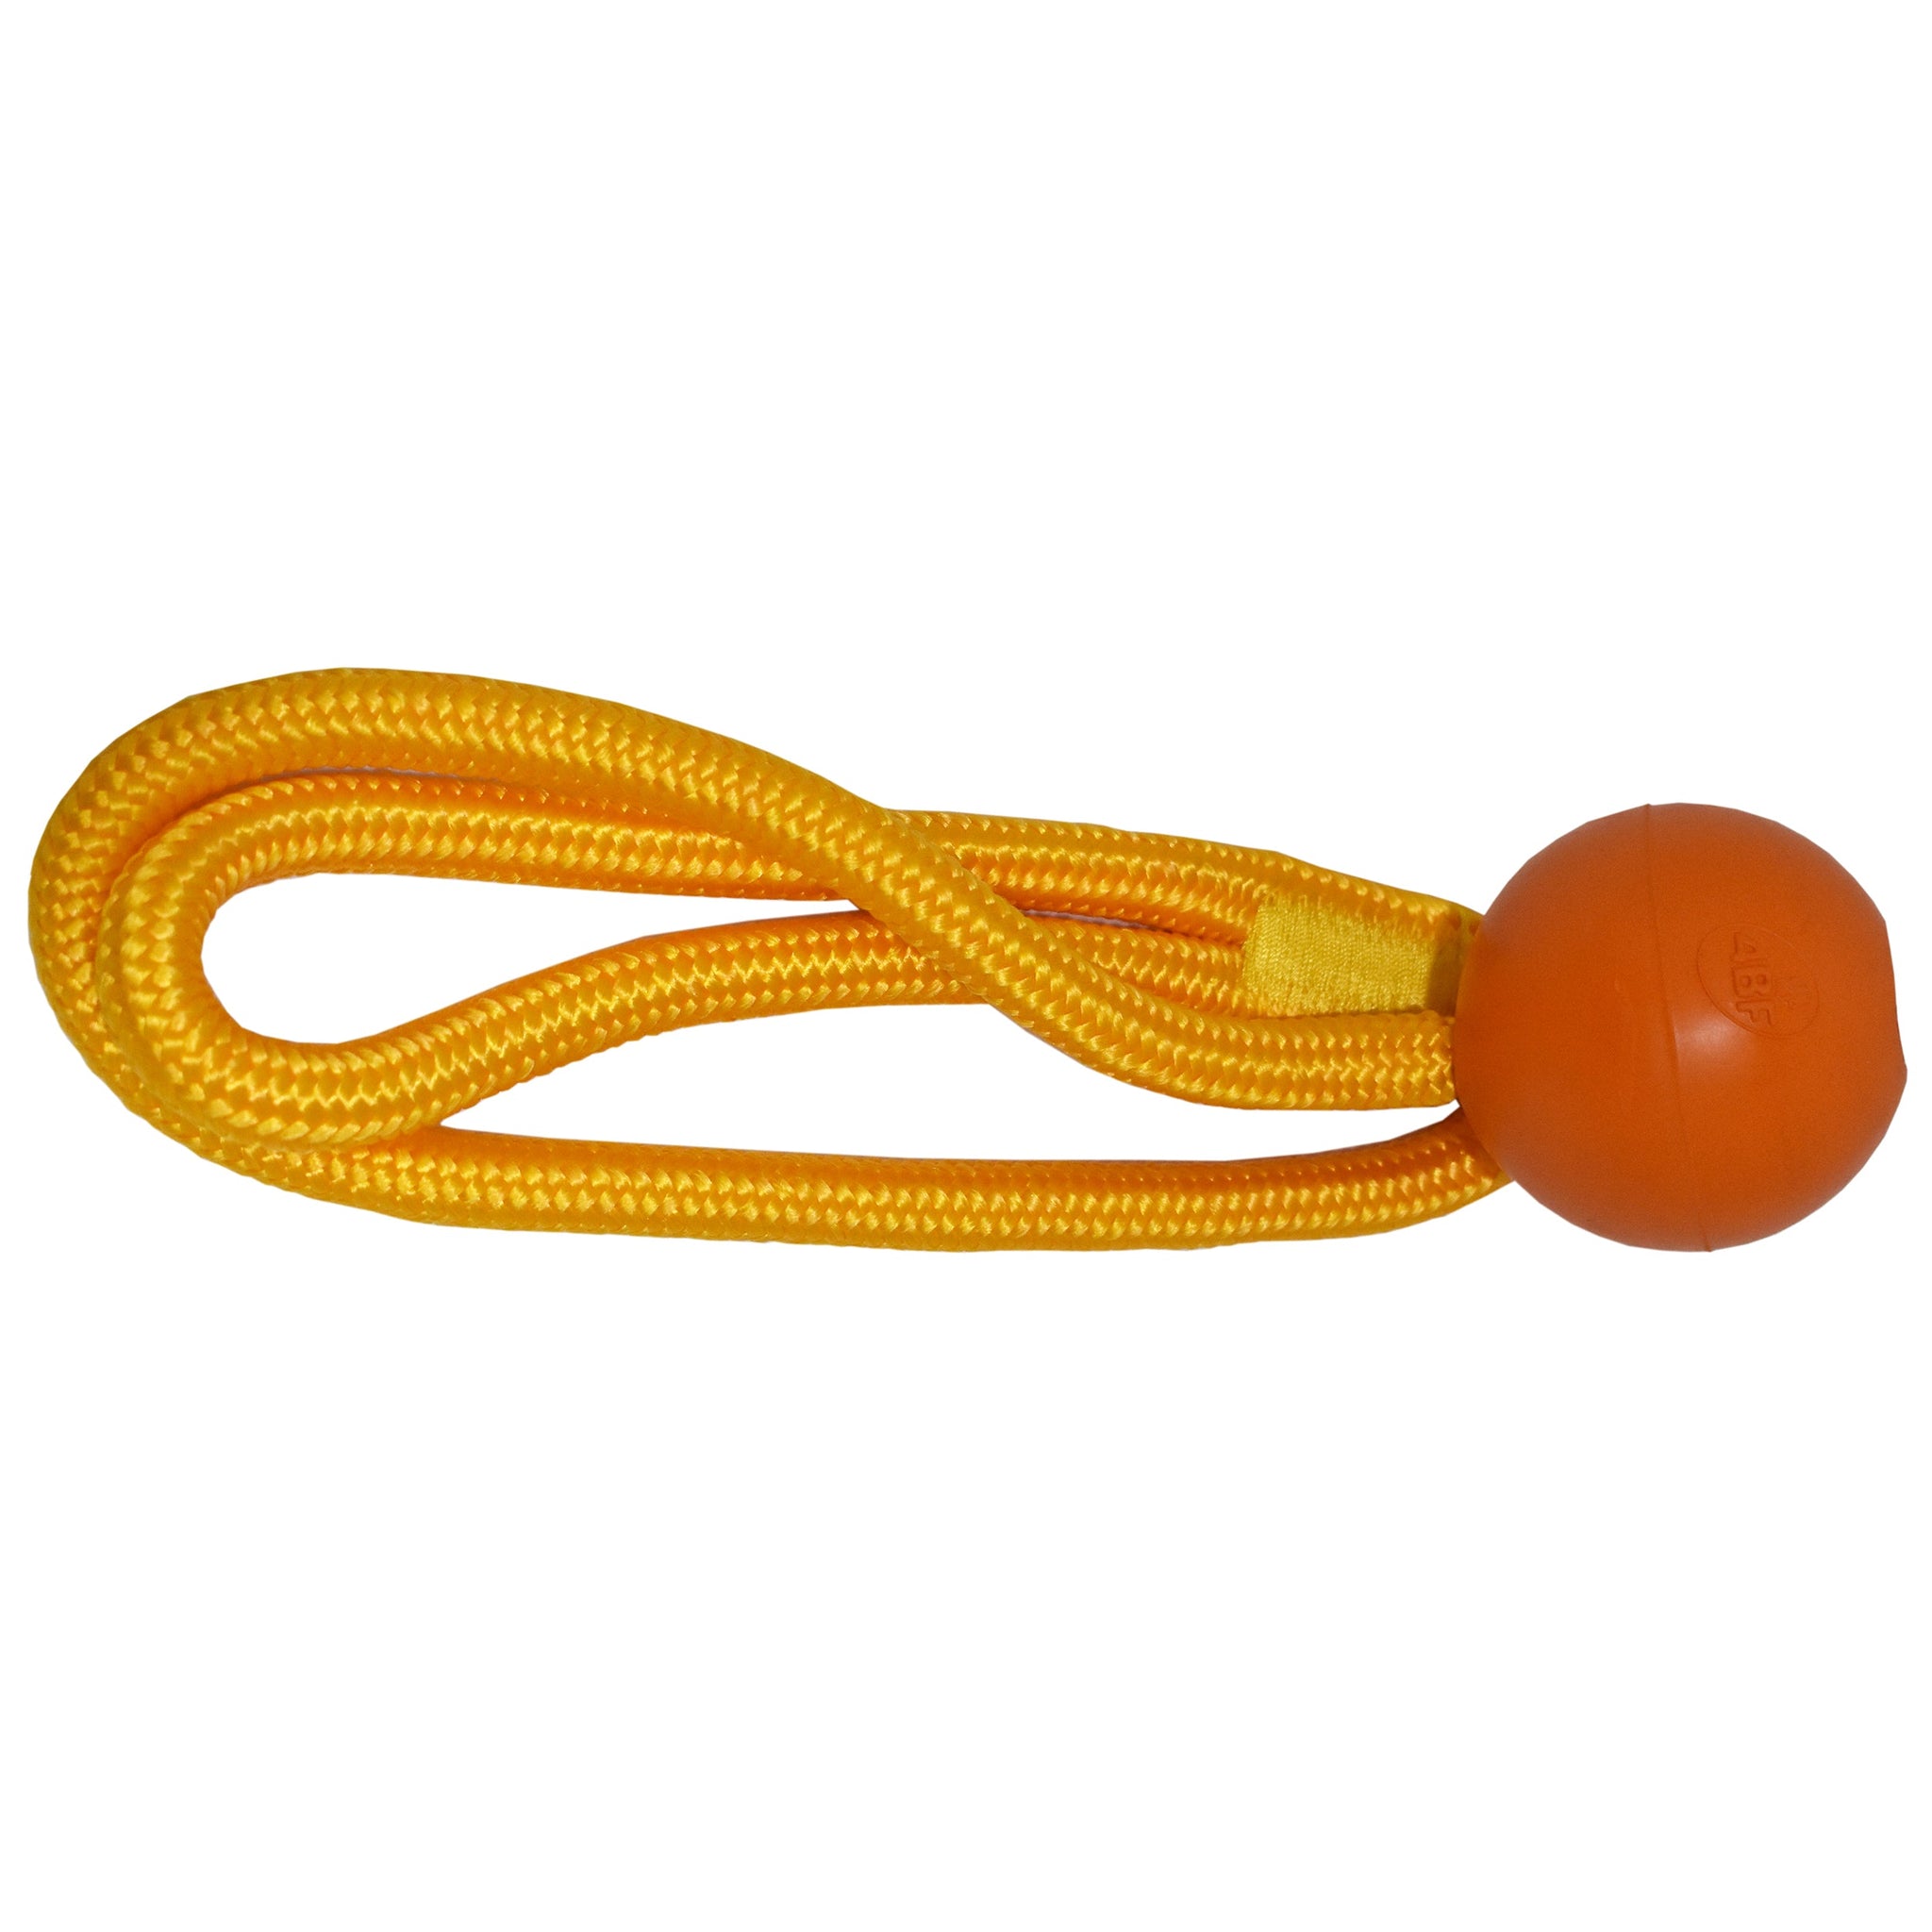 BEST CRAZY BOUNCE DOG ROPE | 4BF SMALL